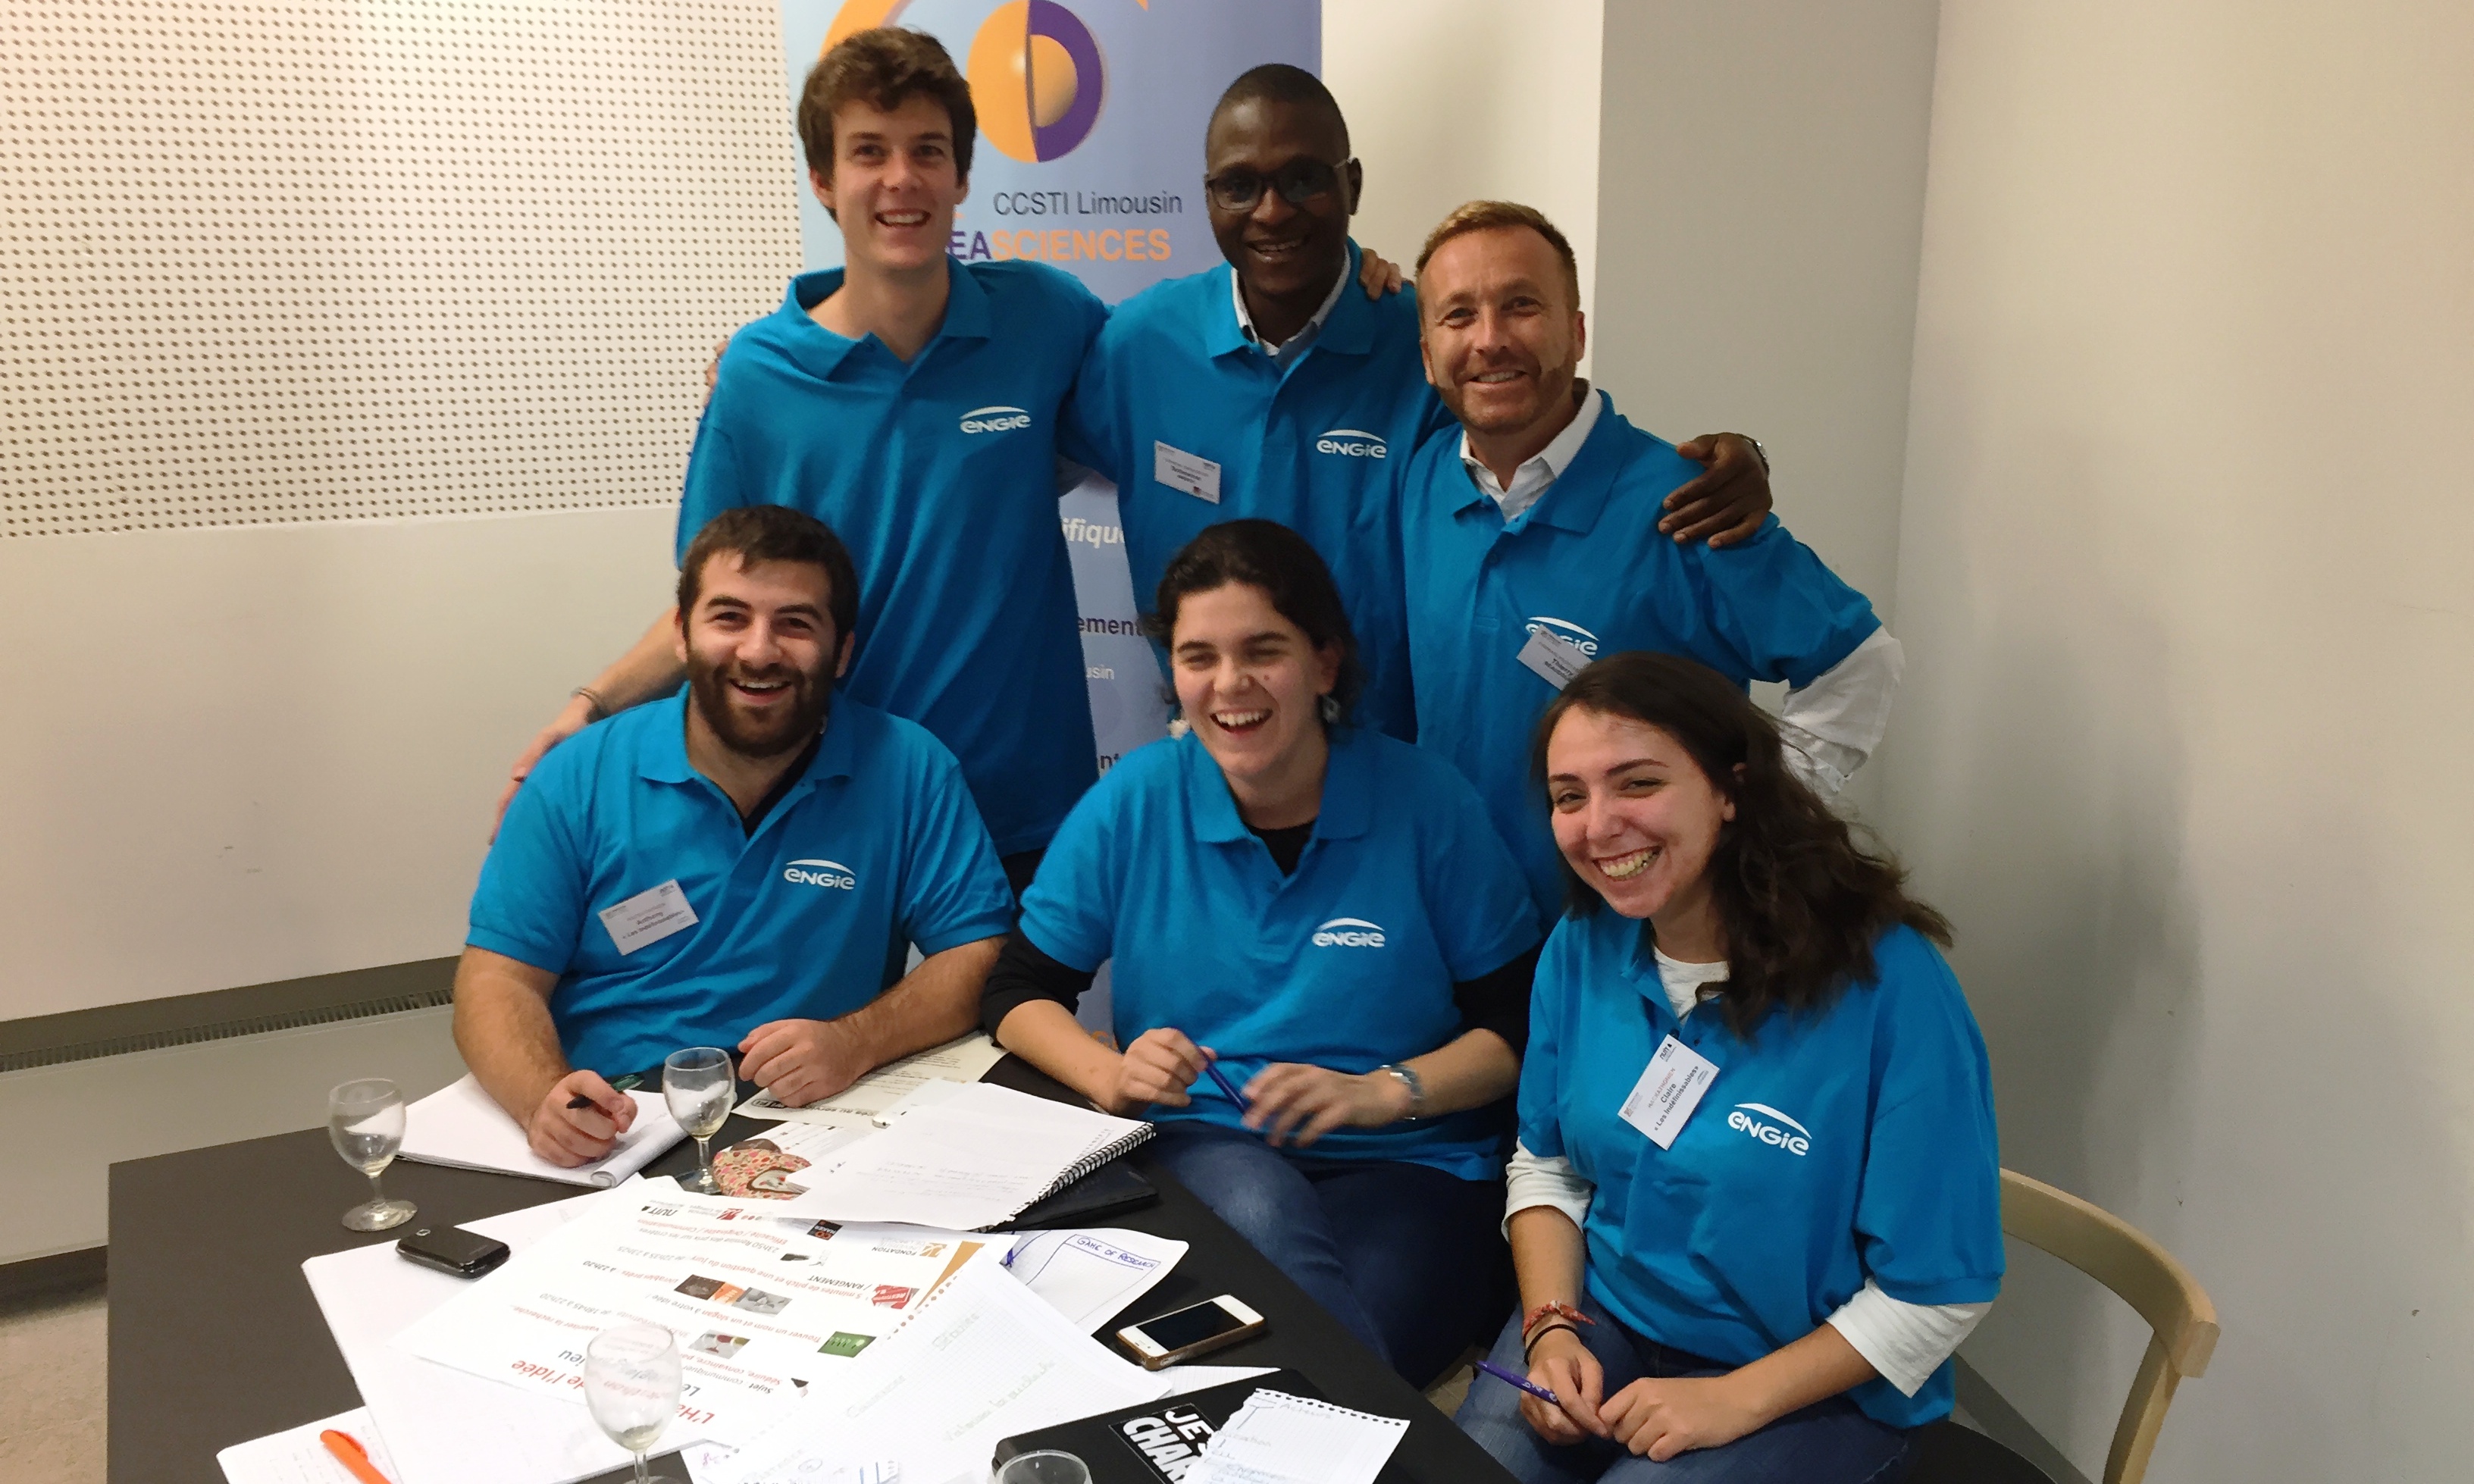 At the Ideas Hackathon, ENGIE’s team will work on communicating about research